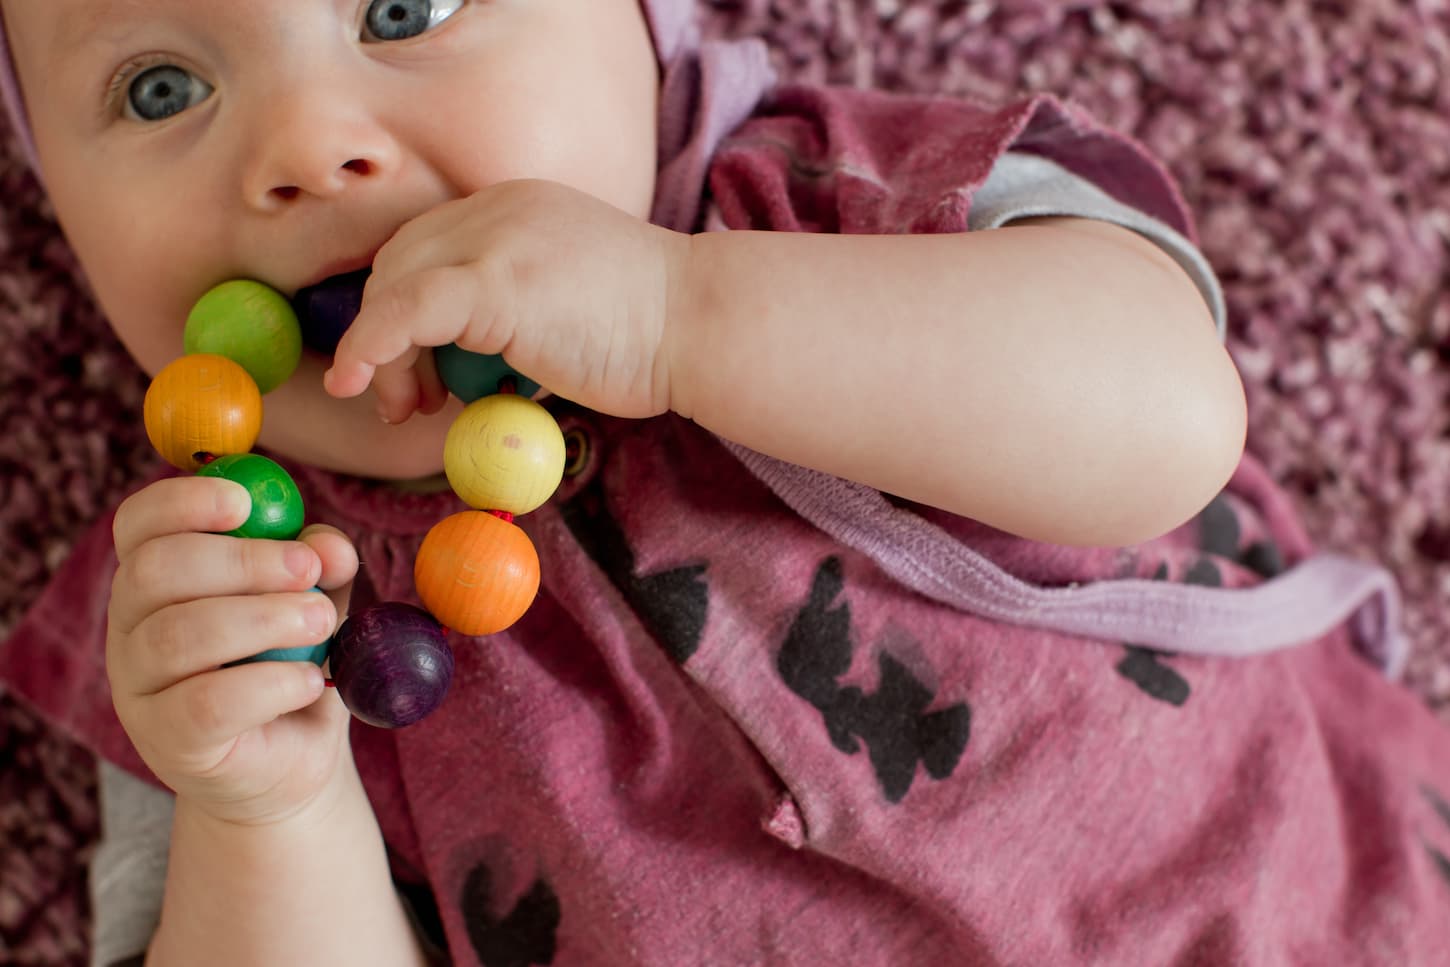 An image of a Baby girl with a teething toy.